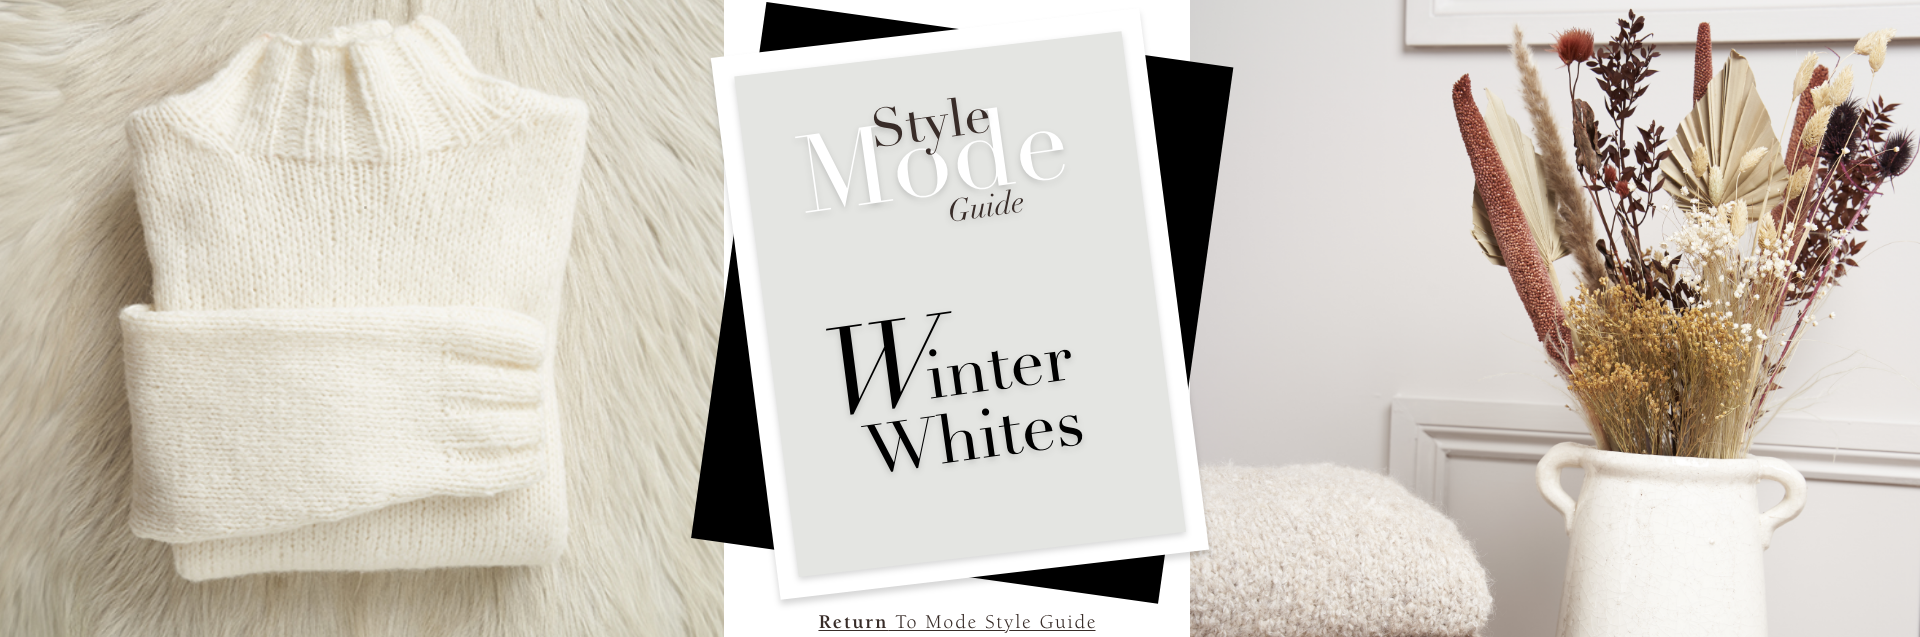 MODE Style Guide Winter Whites